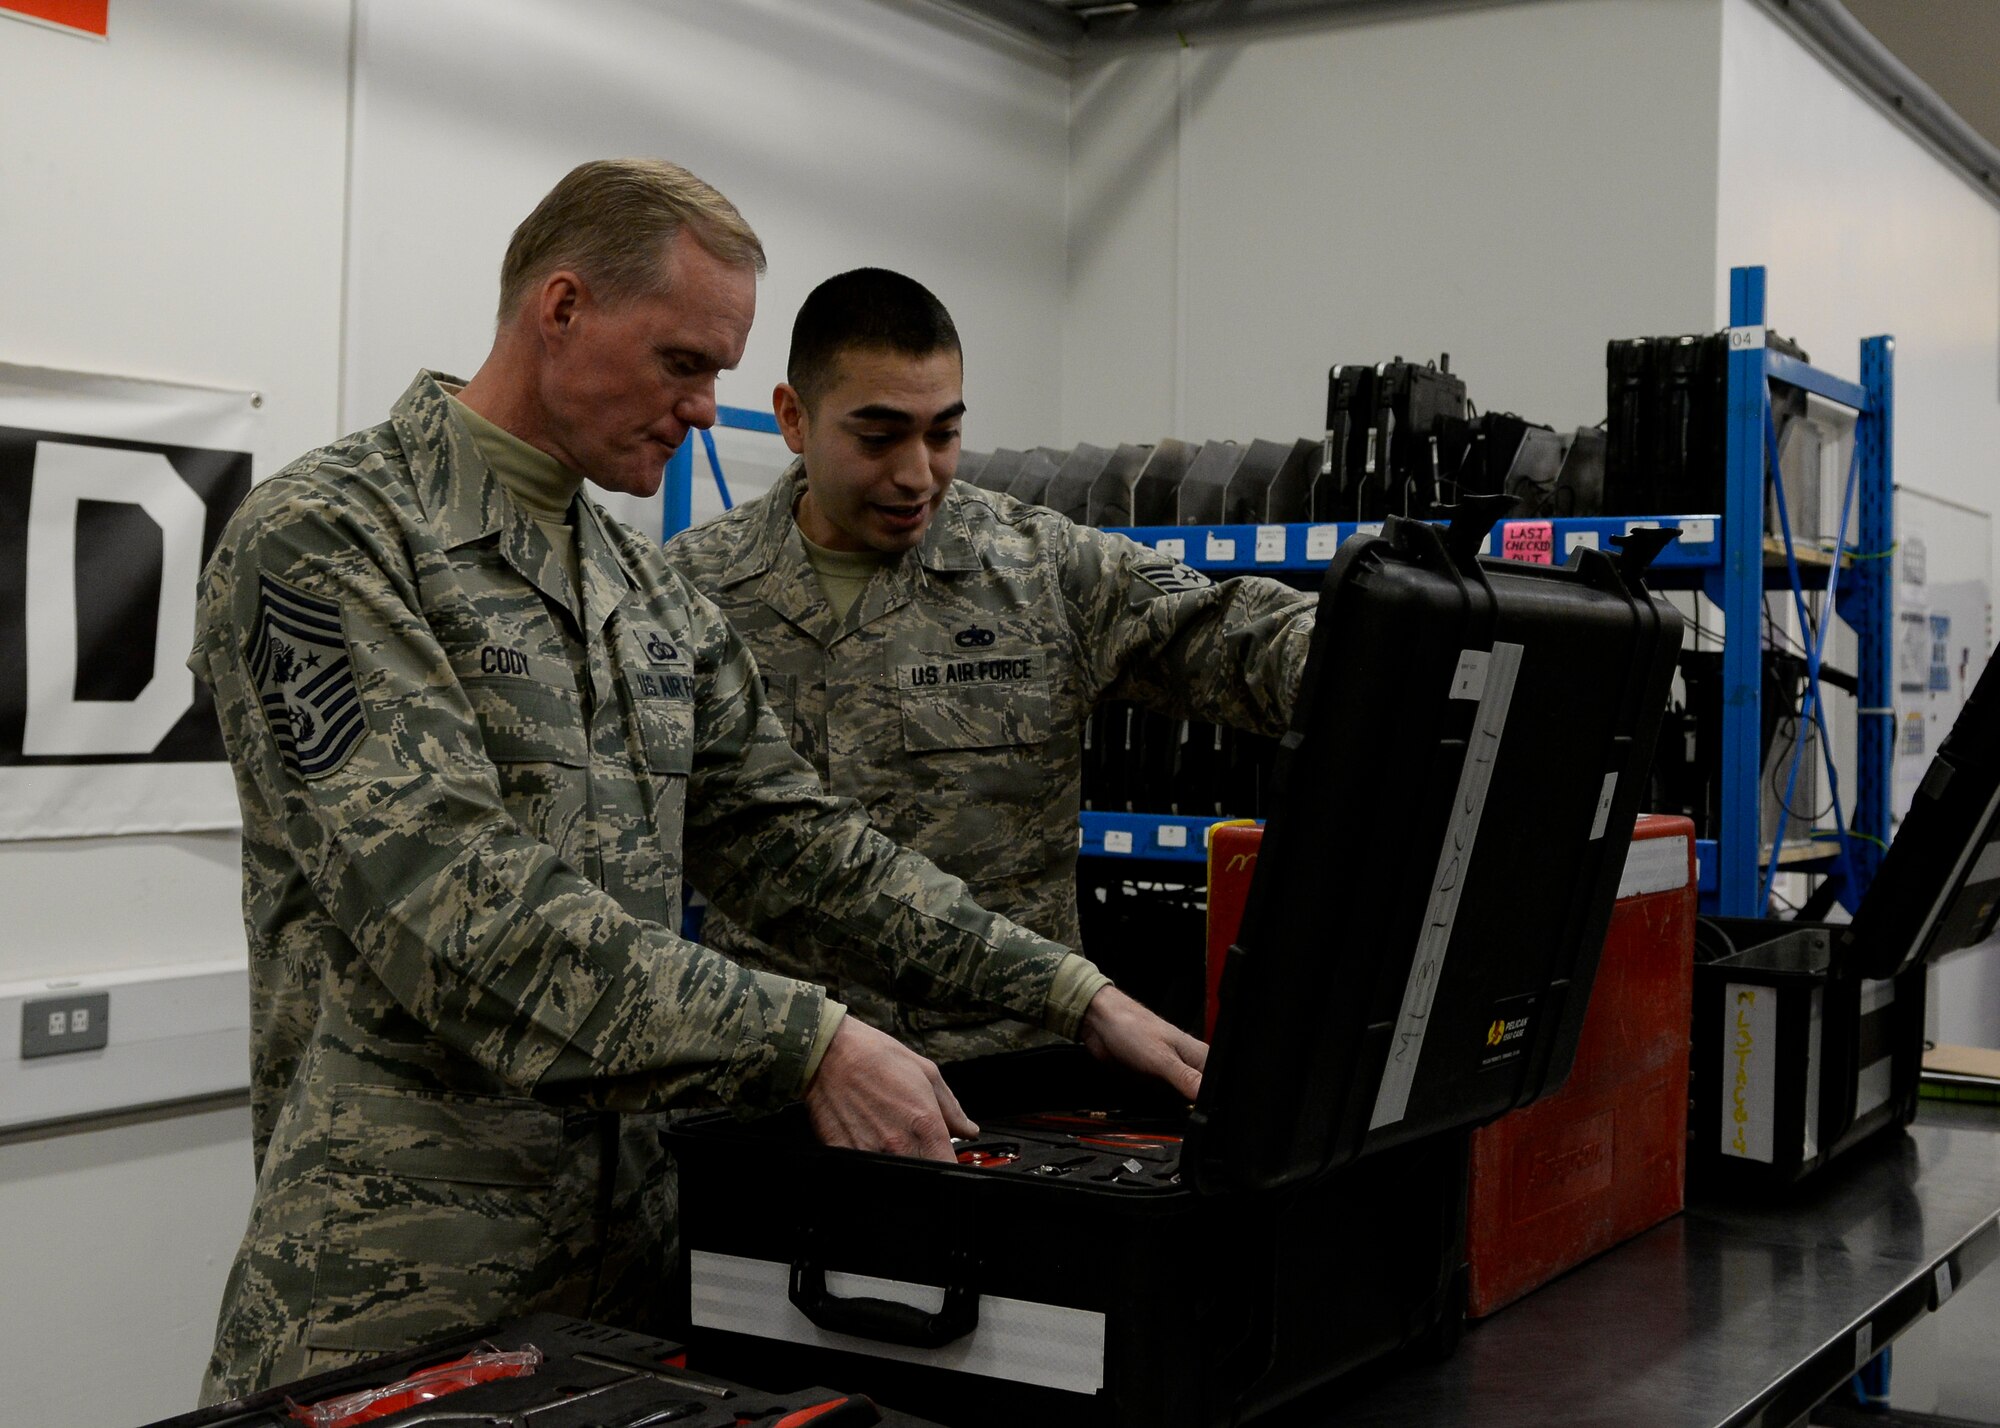 U.S. Air Force Staff Sgt. Nickalos Alvarado, 100th Aircraft Maintenance Squadron dedicated crew chief, shows Chief Master Sgt. of the Air Force James Cody a tool kit Jan. 28, 2016, on RAF Mildenhall, England. Cody met with Airmen from multiple units during his visit including the 352nd Special Operations Wing, the 95th Reconnaissance Squadron and the 488th Intelligence Squadron. (U.S. Air Force photo by Senior Airman Victoria H. Taylor/Released)